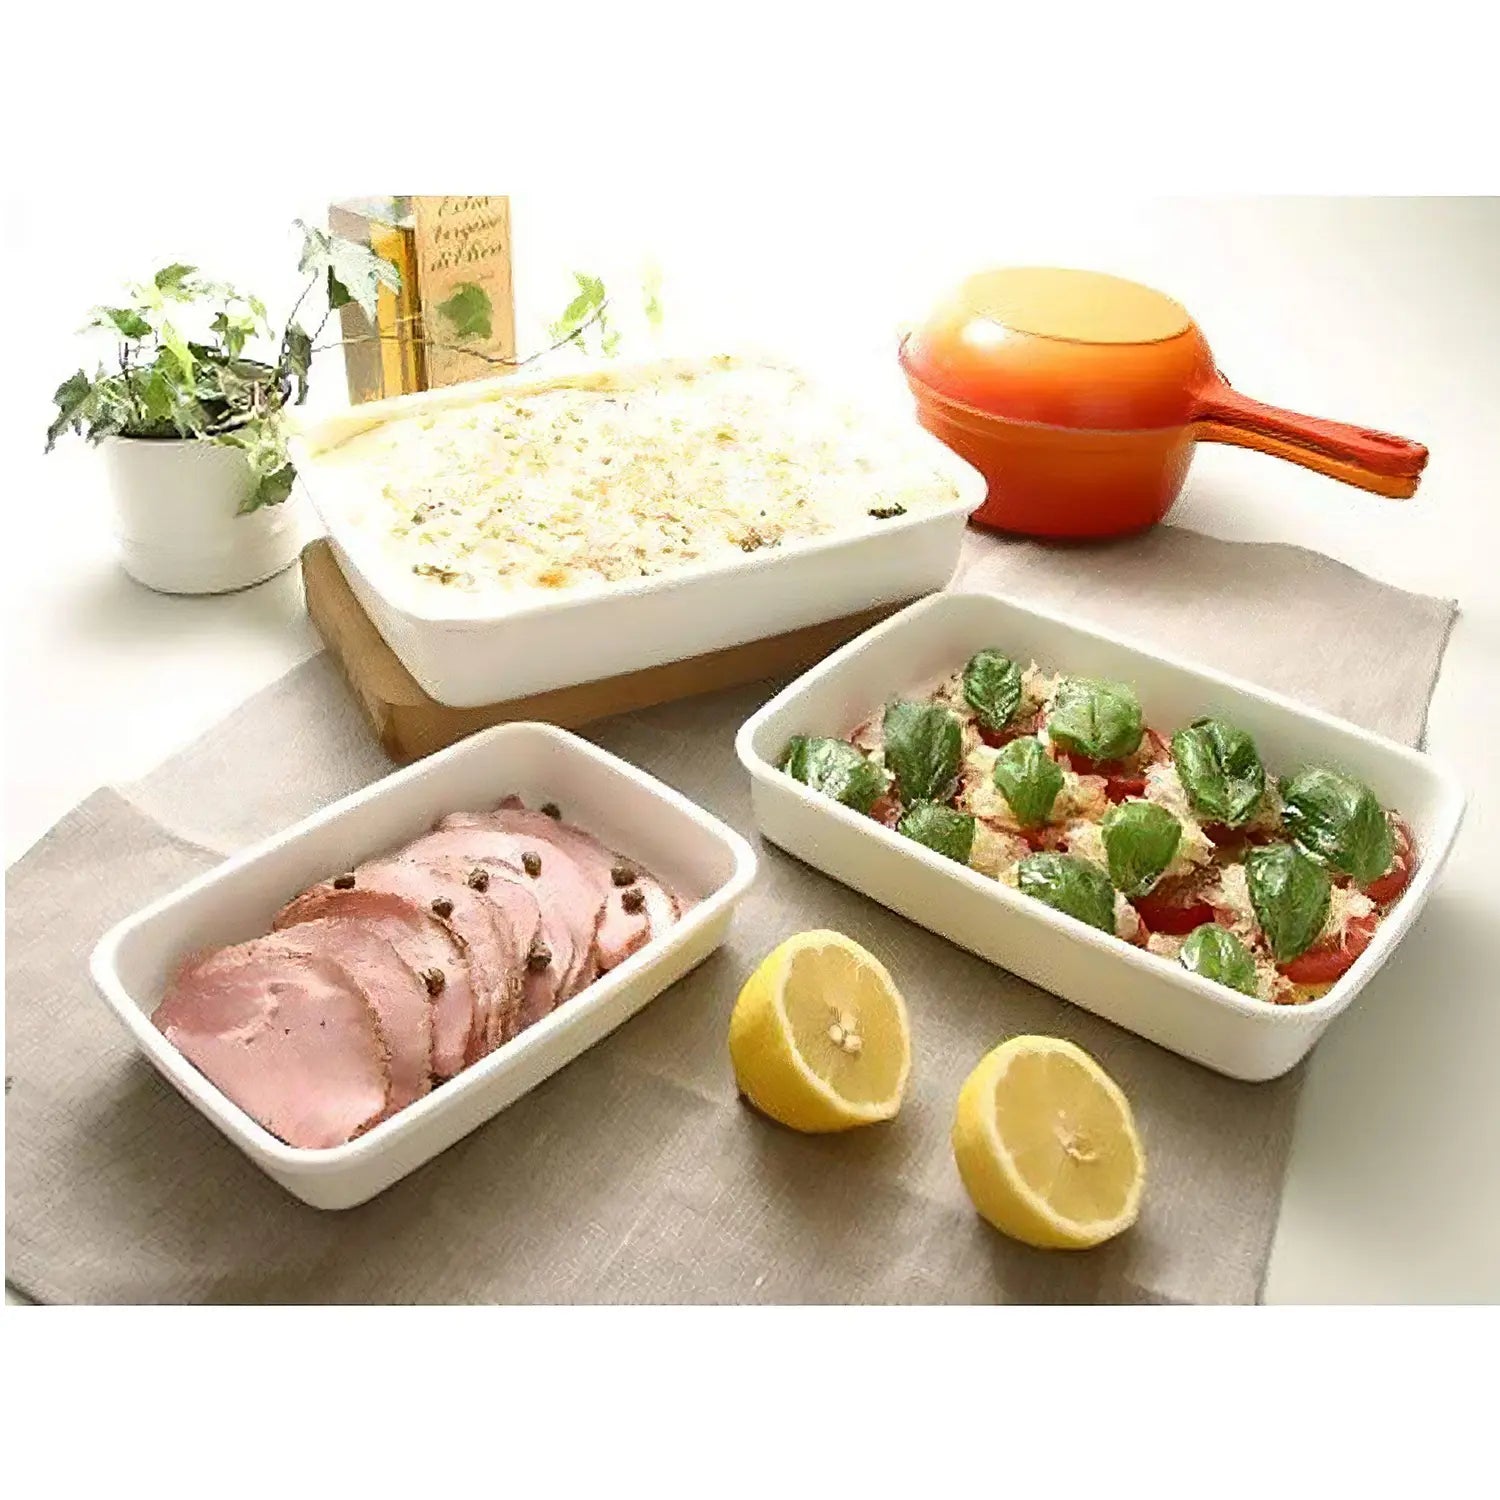 Noda Horo White Series Enamel Square Food Containers with Sealed Lid -  Globalkitchen Japan